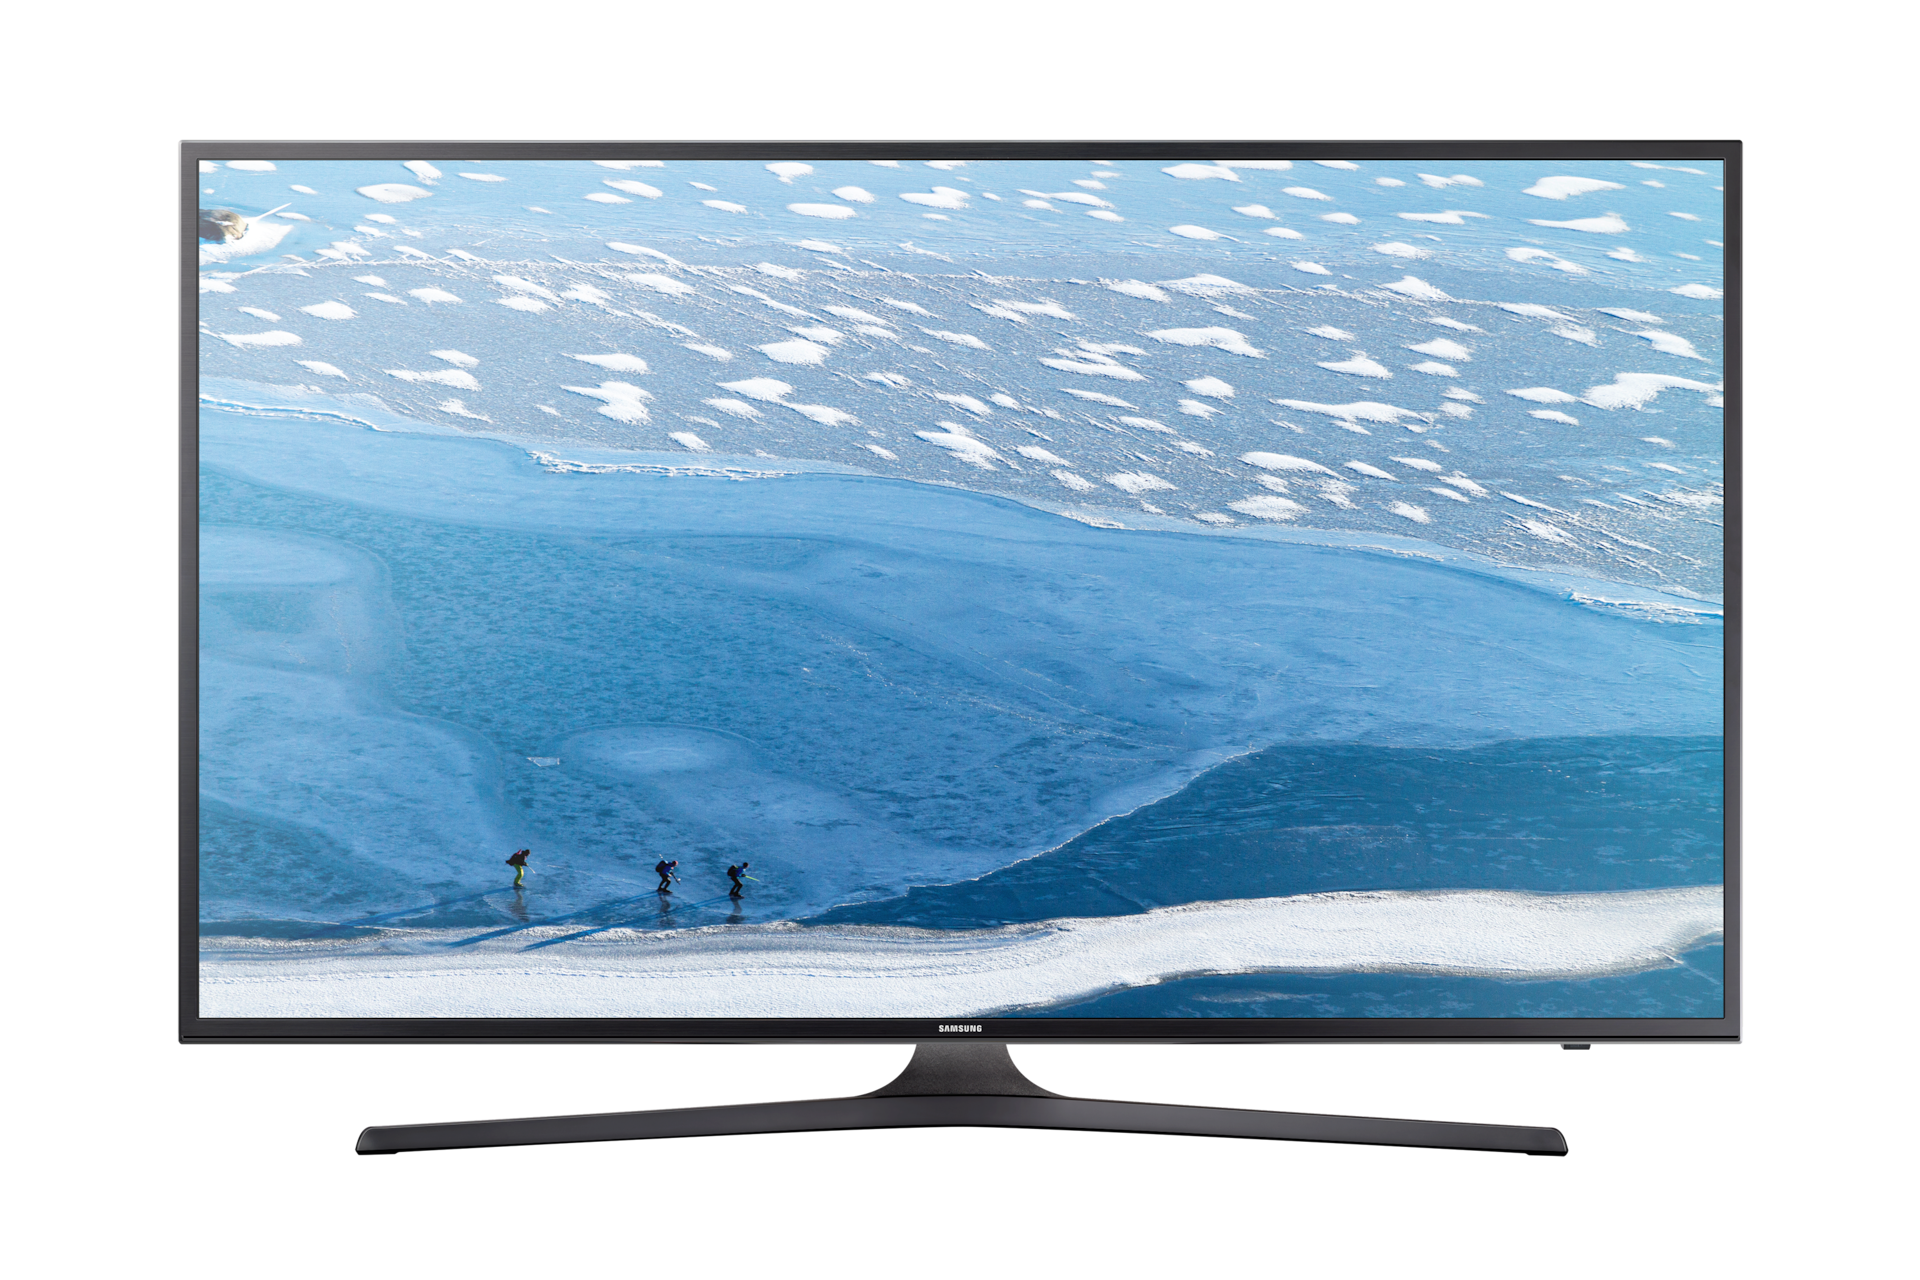 50 4K ULTRA HD ANDROID TV™